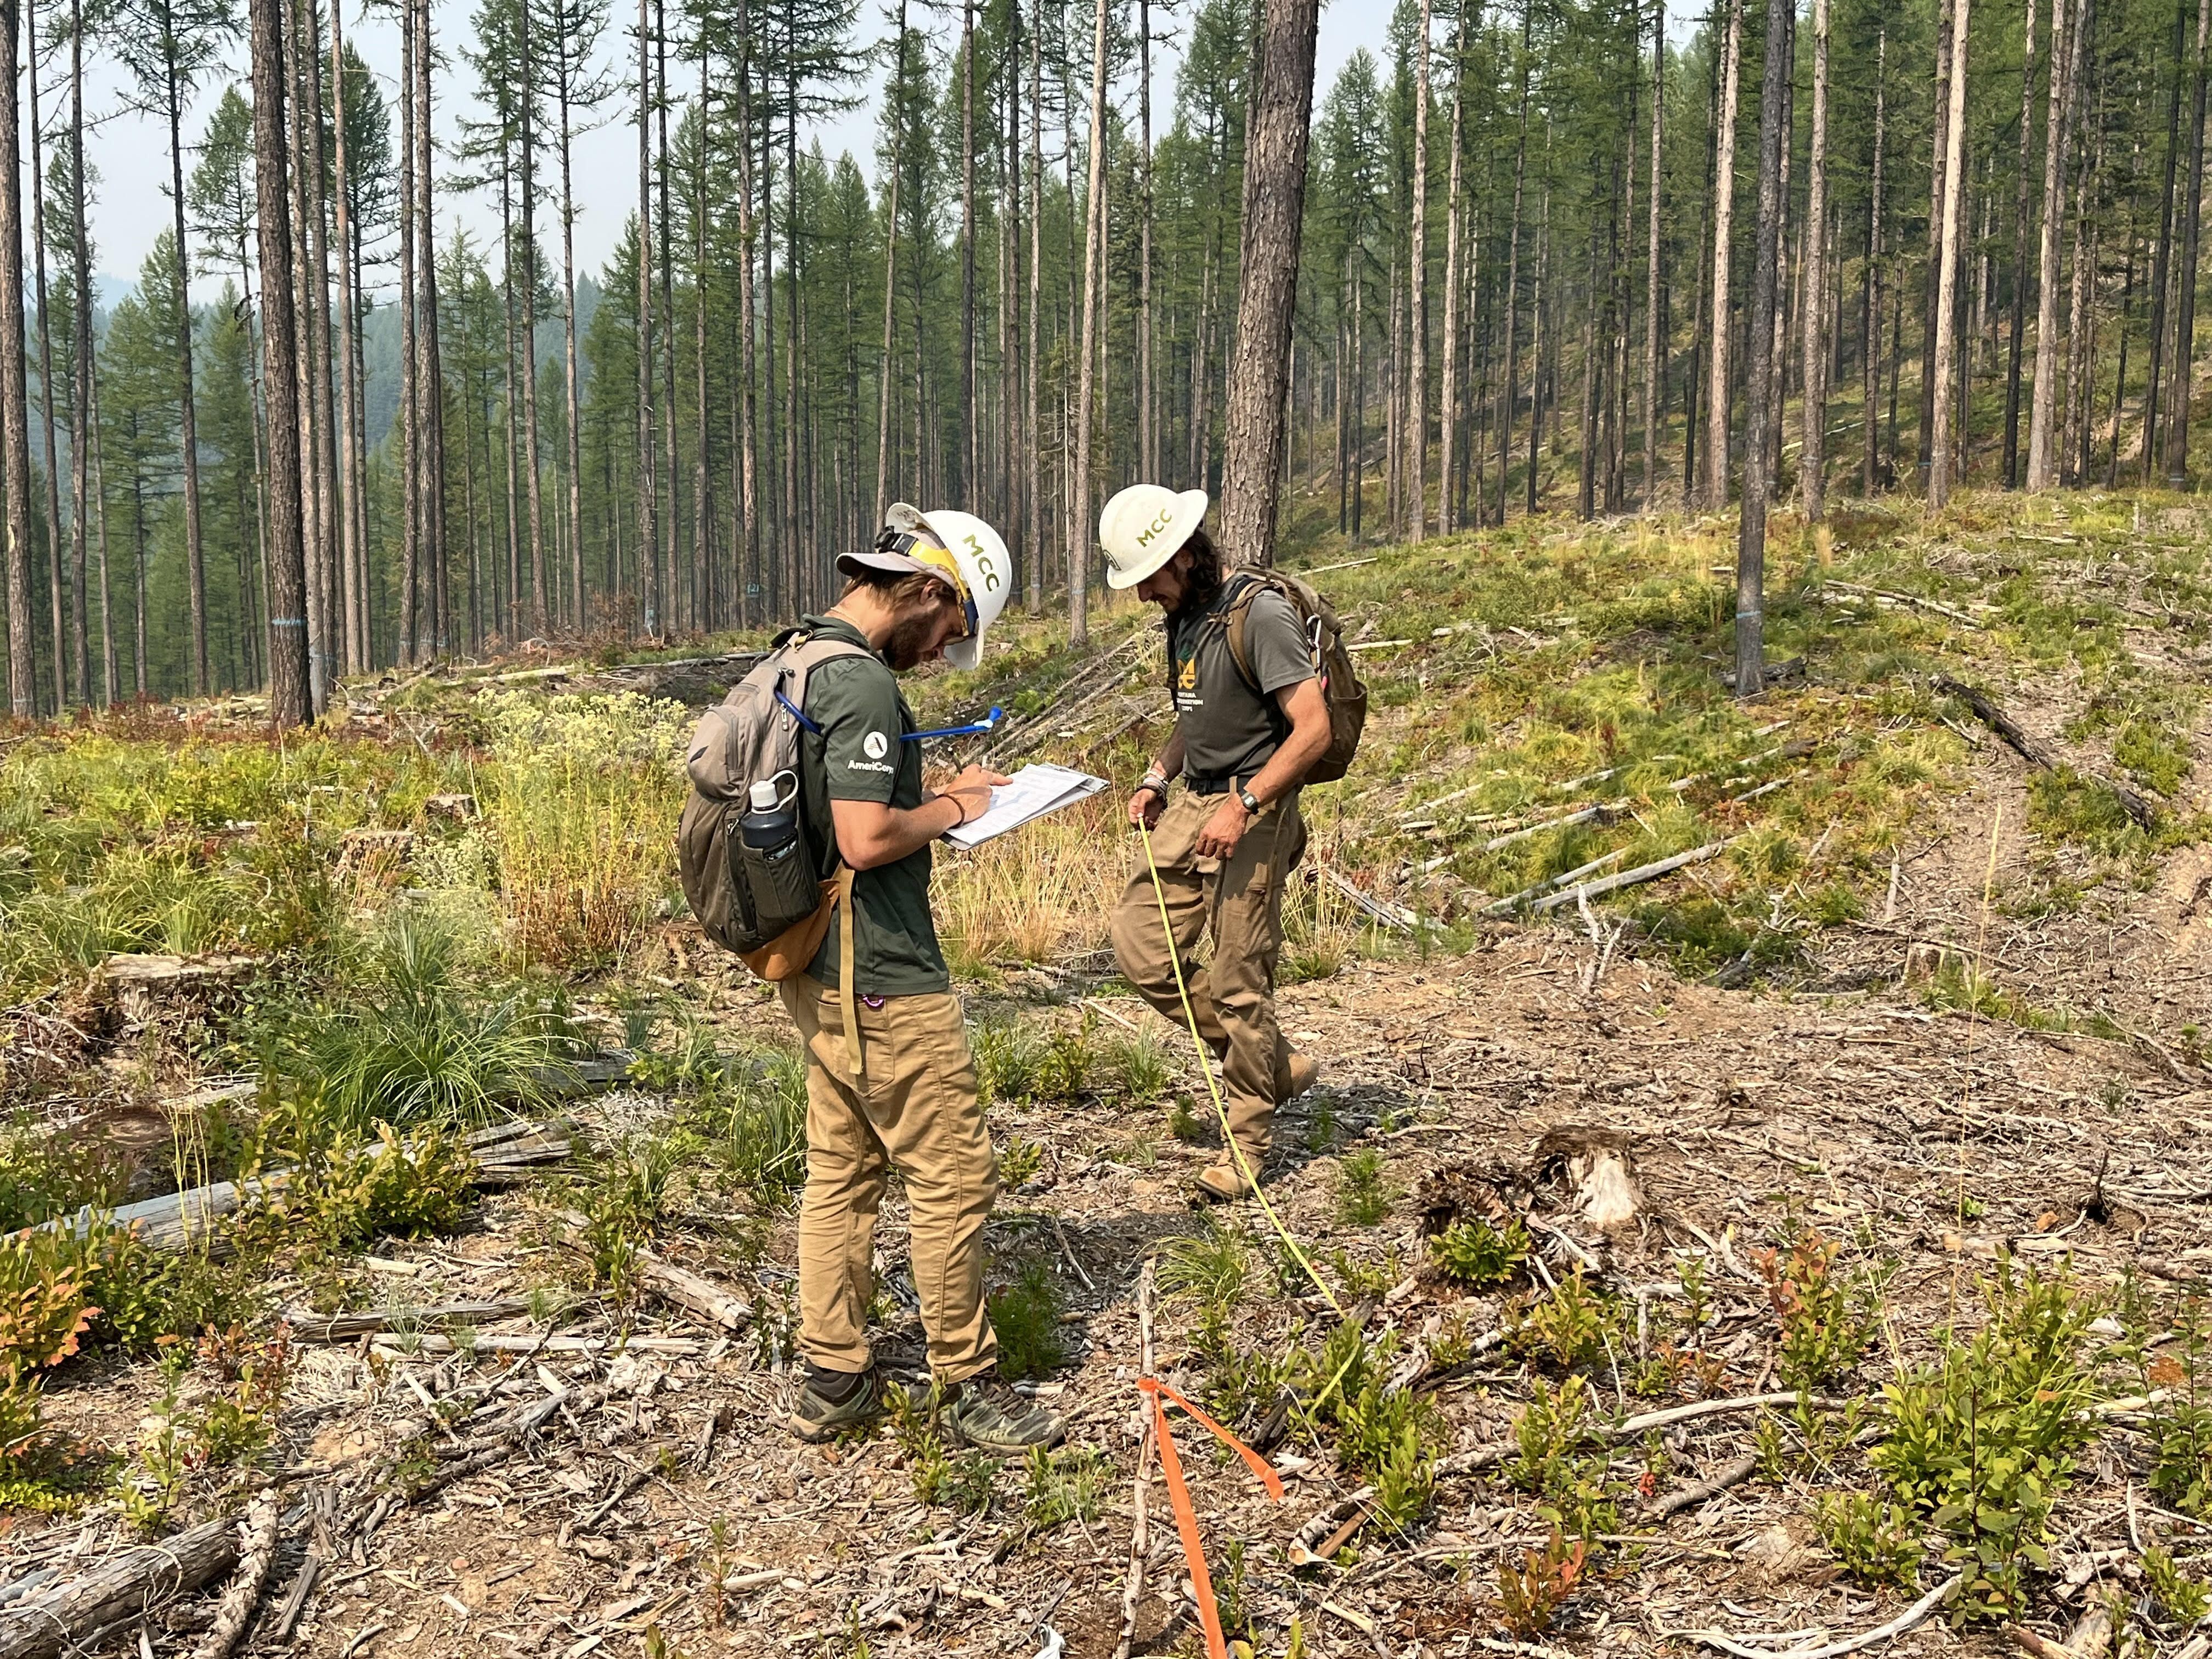 Two field crew leaders complete a forestry survey.